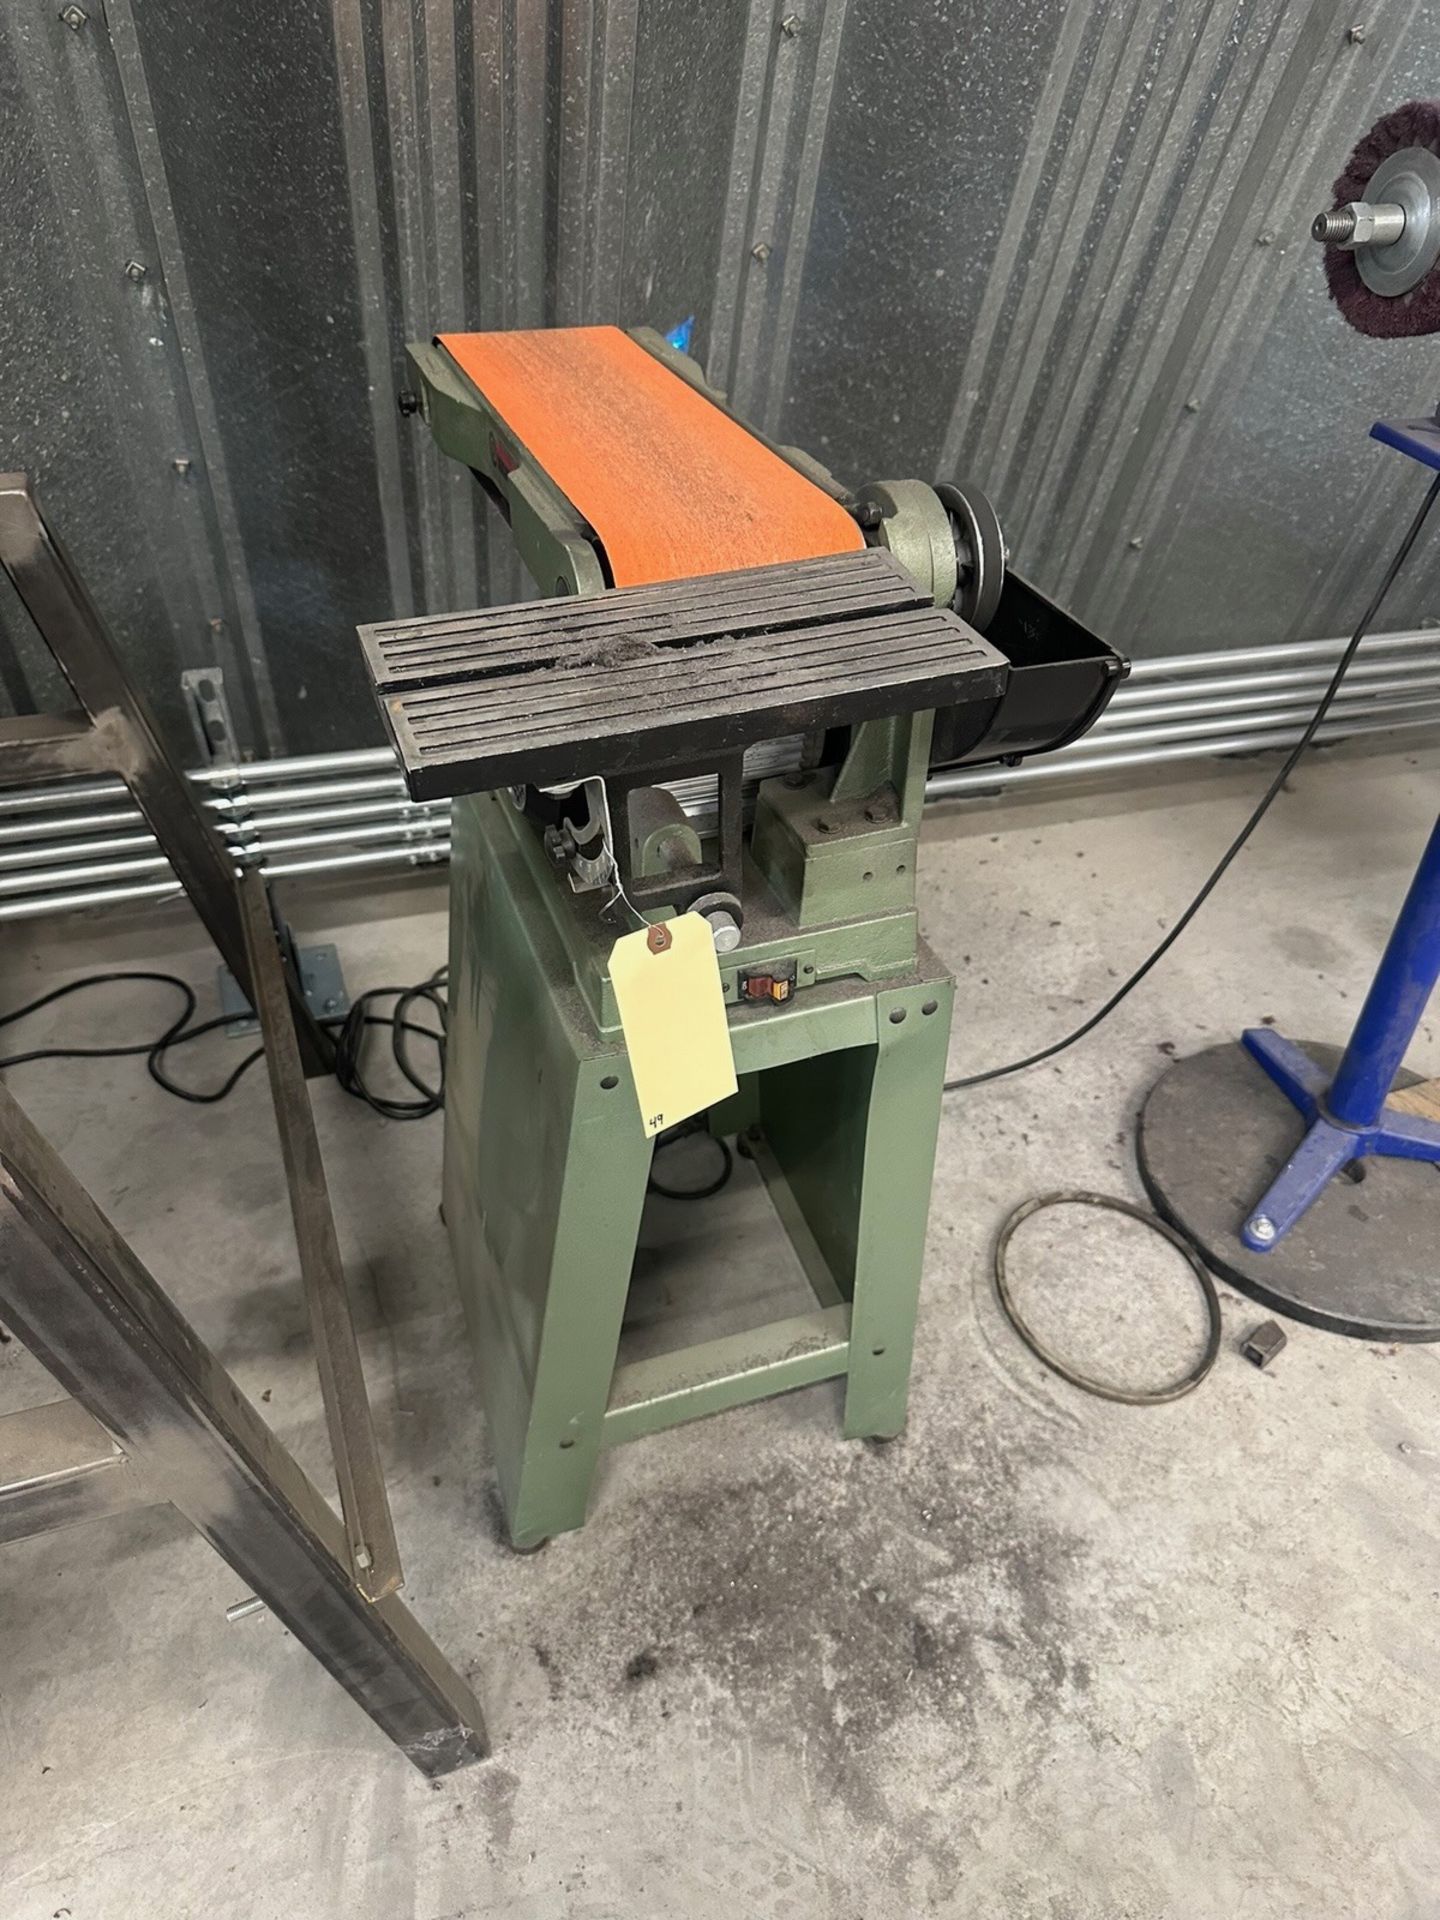 Central Machinery, Combination Sander, Item 61750, S/N 358451841 | Rig Fee $35